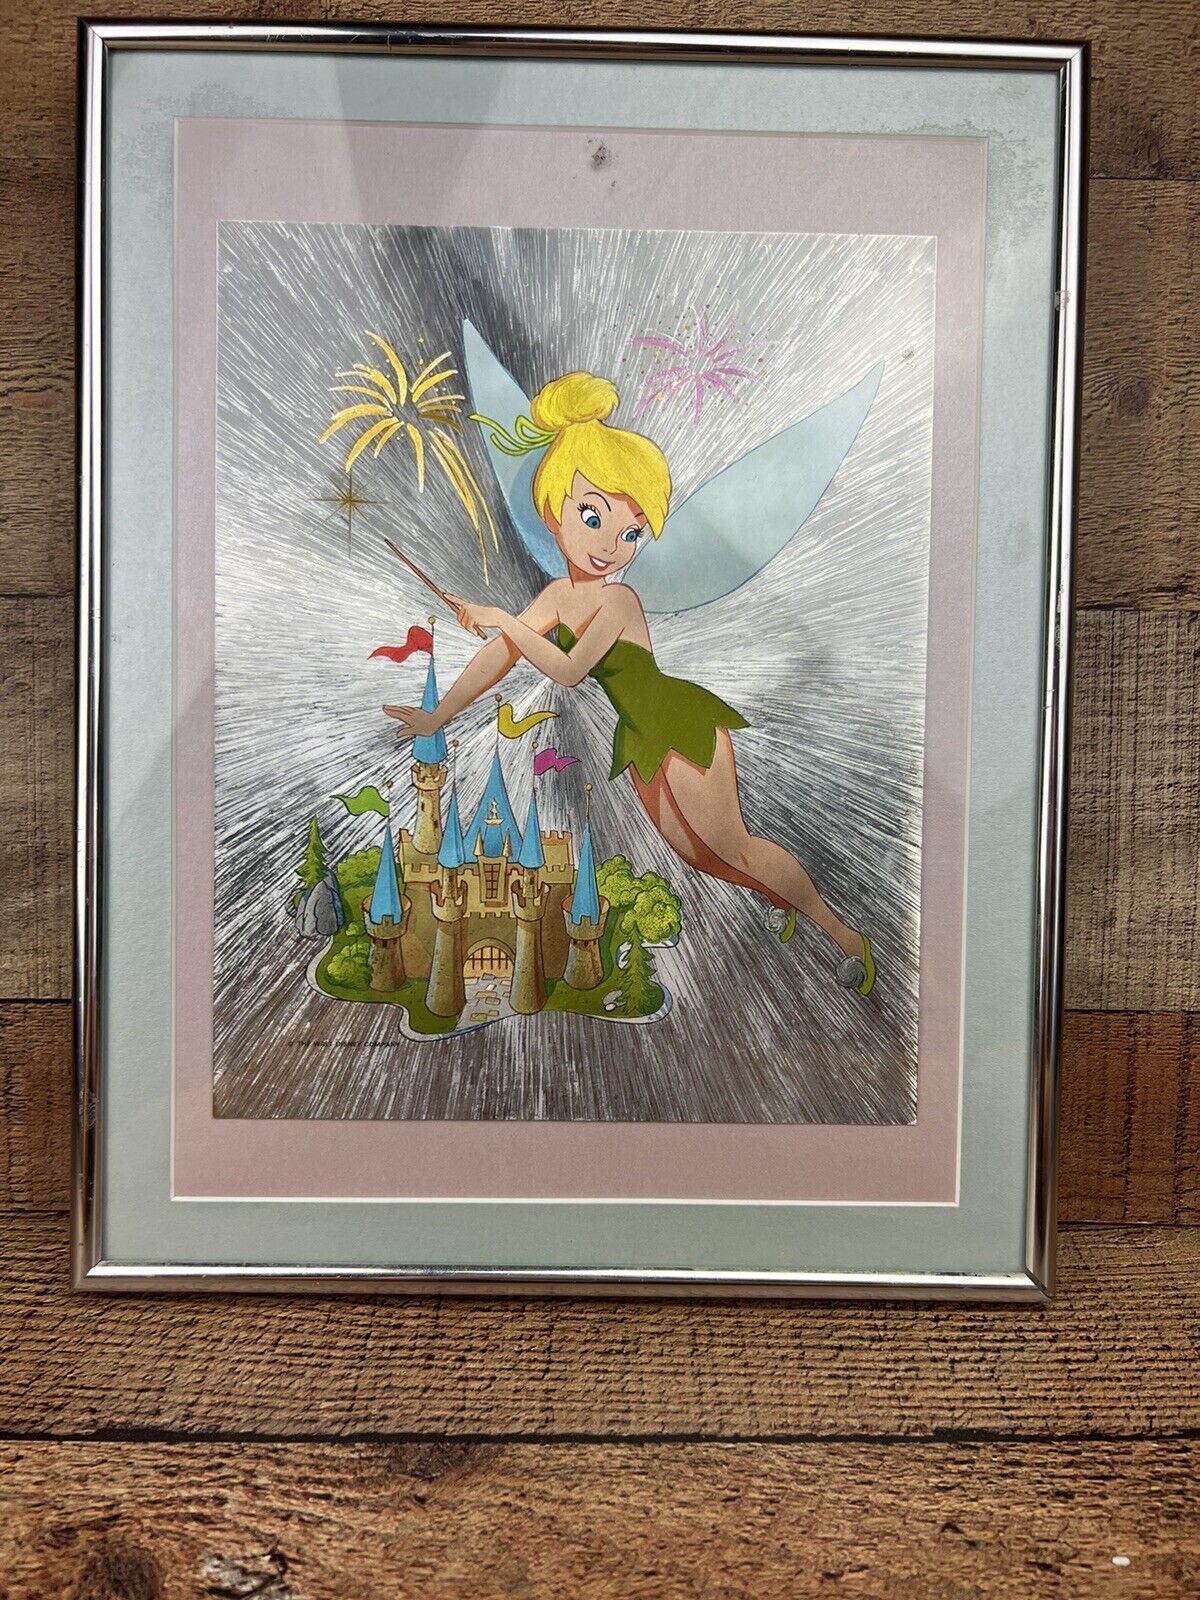 Vintage Collectible Disney Tinkerbell 3D Dufex Silver Foil Hologram Art Poster